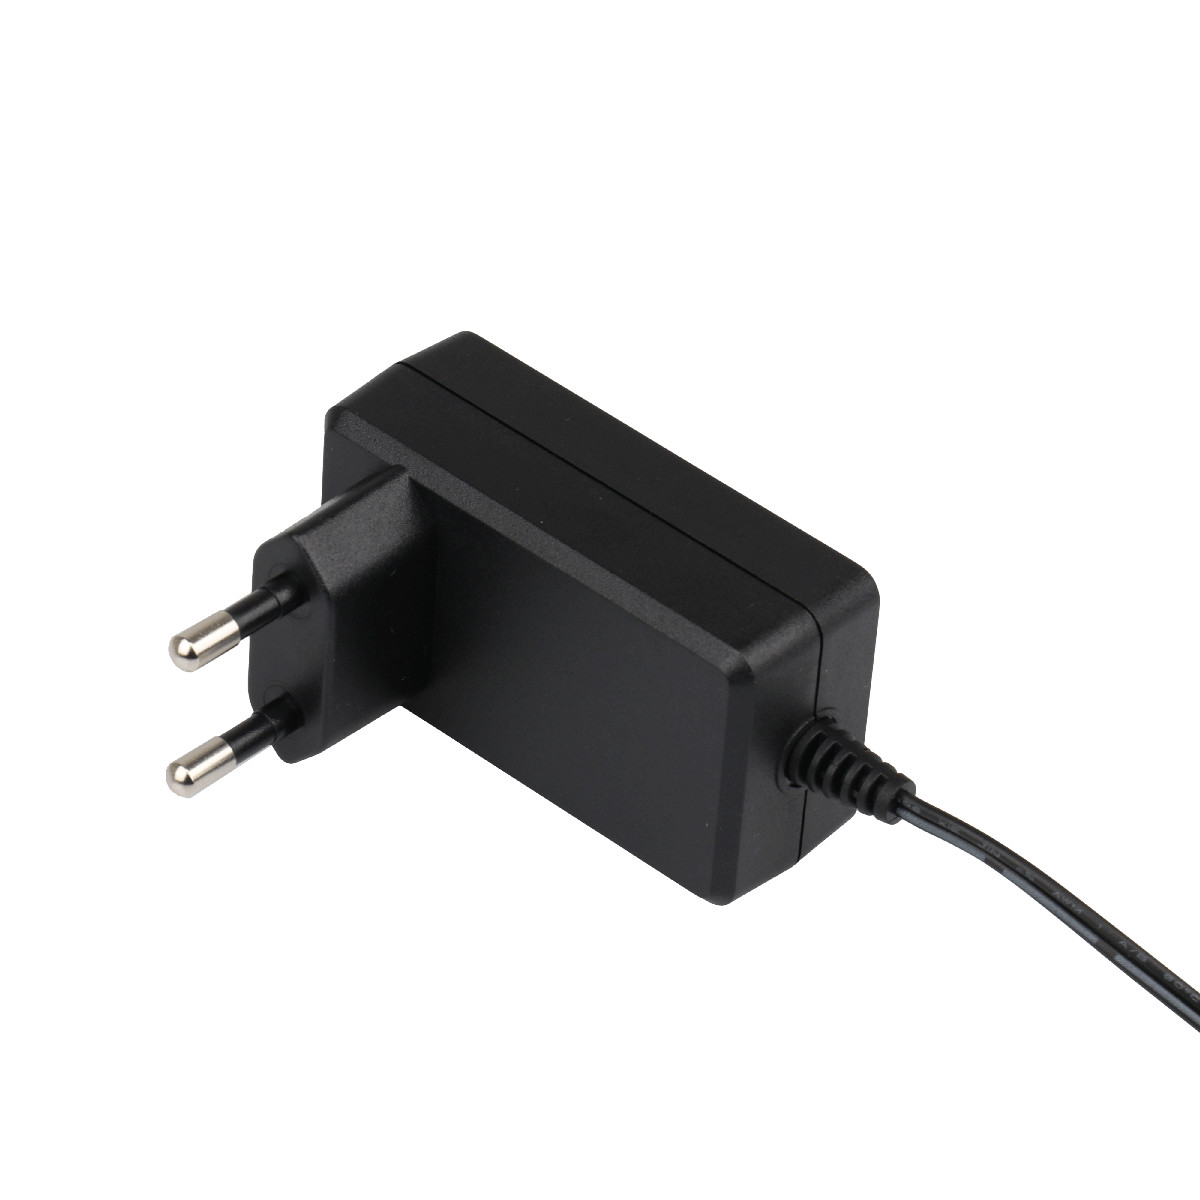 Wholesale 12Vdc 1000mA LED Power Supply Adapter AC To DC EN61347 Approval from china suppliers